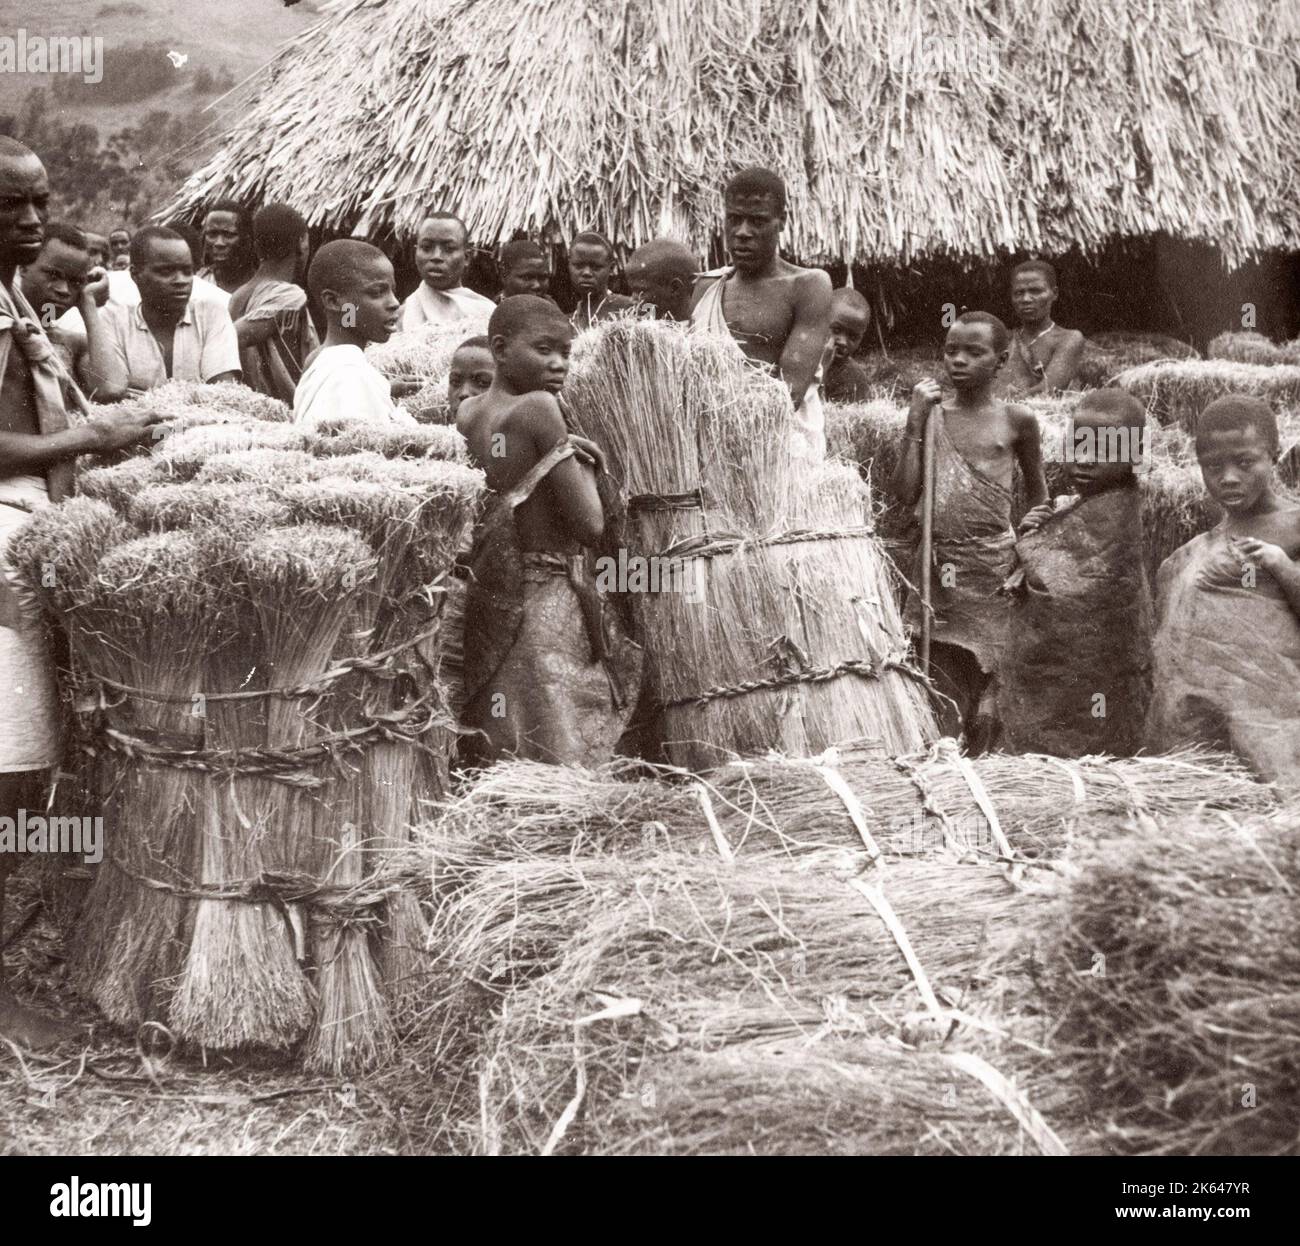 1940s East Africa - Uganda - flax market Narusanje Photograph by a British army recruitment officer stationed in East Africa and the Middle East during World War II Stock Photo